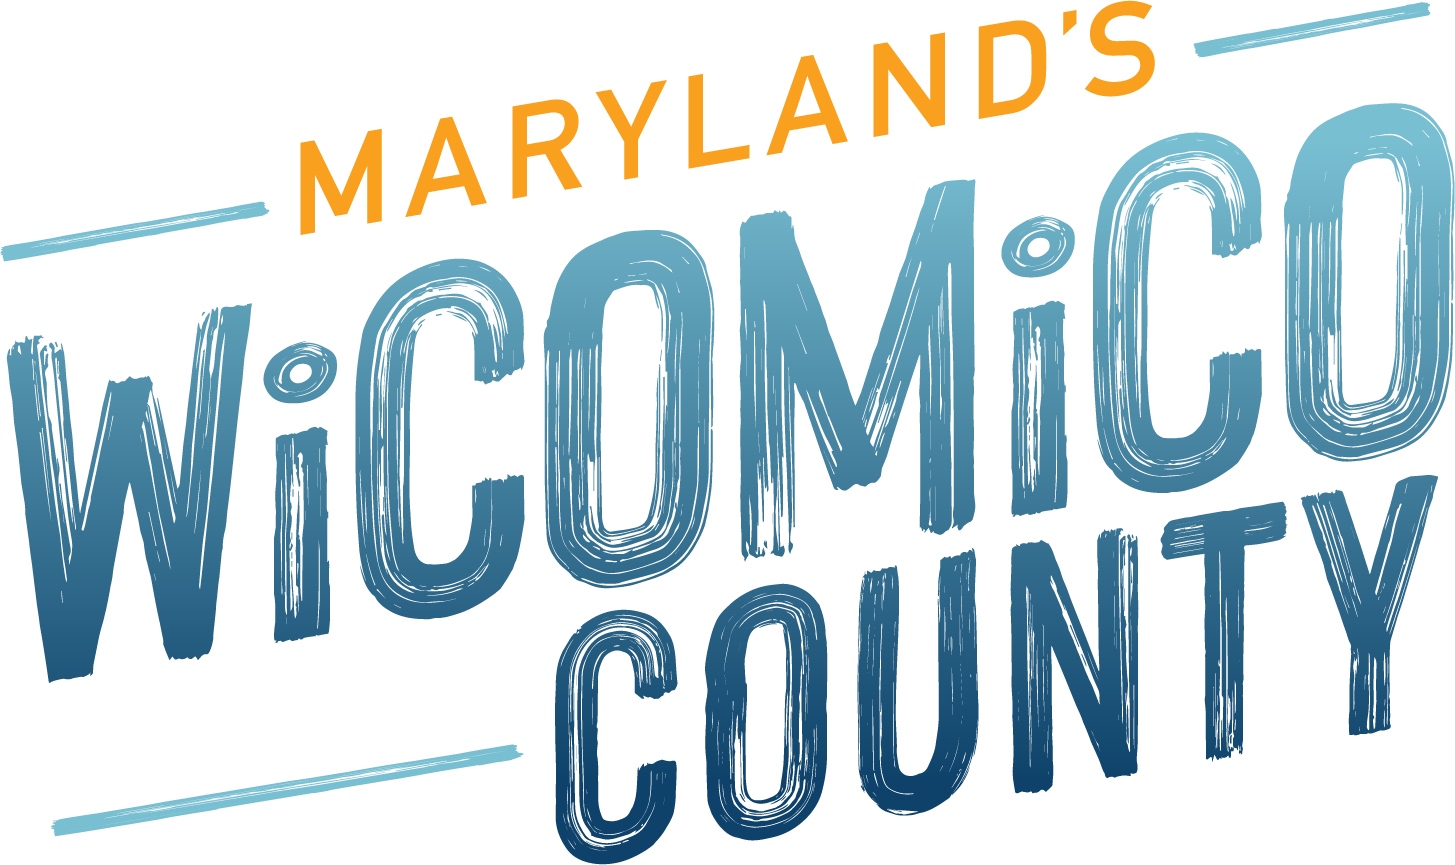 the logo for maryland's wicomico county